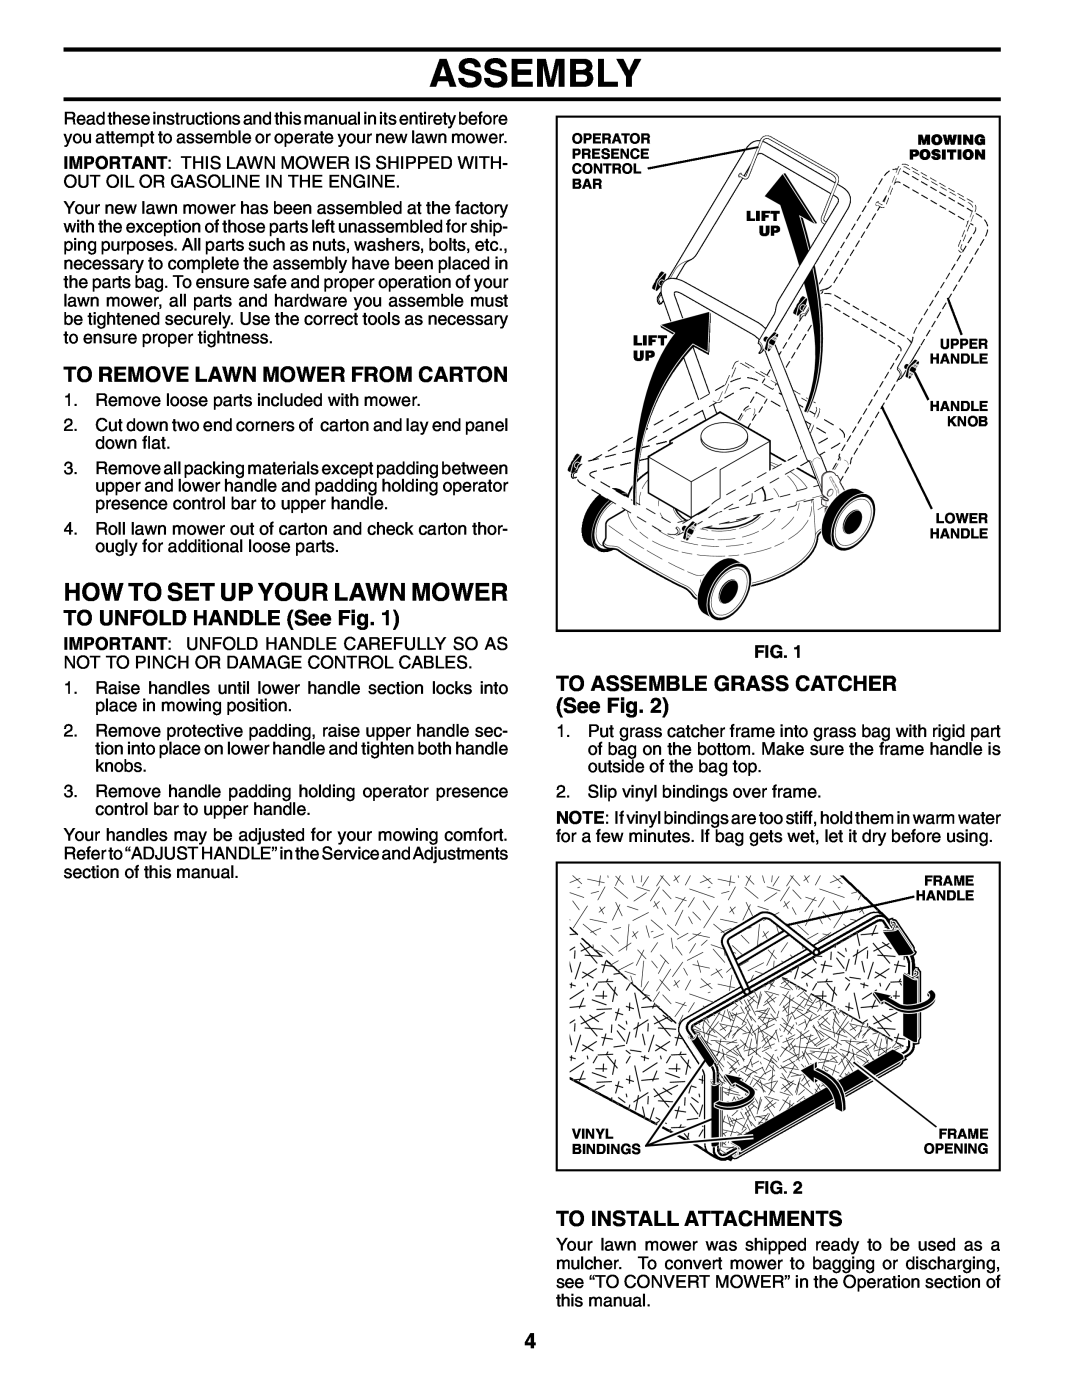 Husqvarna 6522SL Assembly, How To Set Up Your Lawn Mower, To Remove Lawn Mower From Carton, TO UNFOLD HANDLE See Fig 